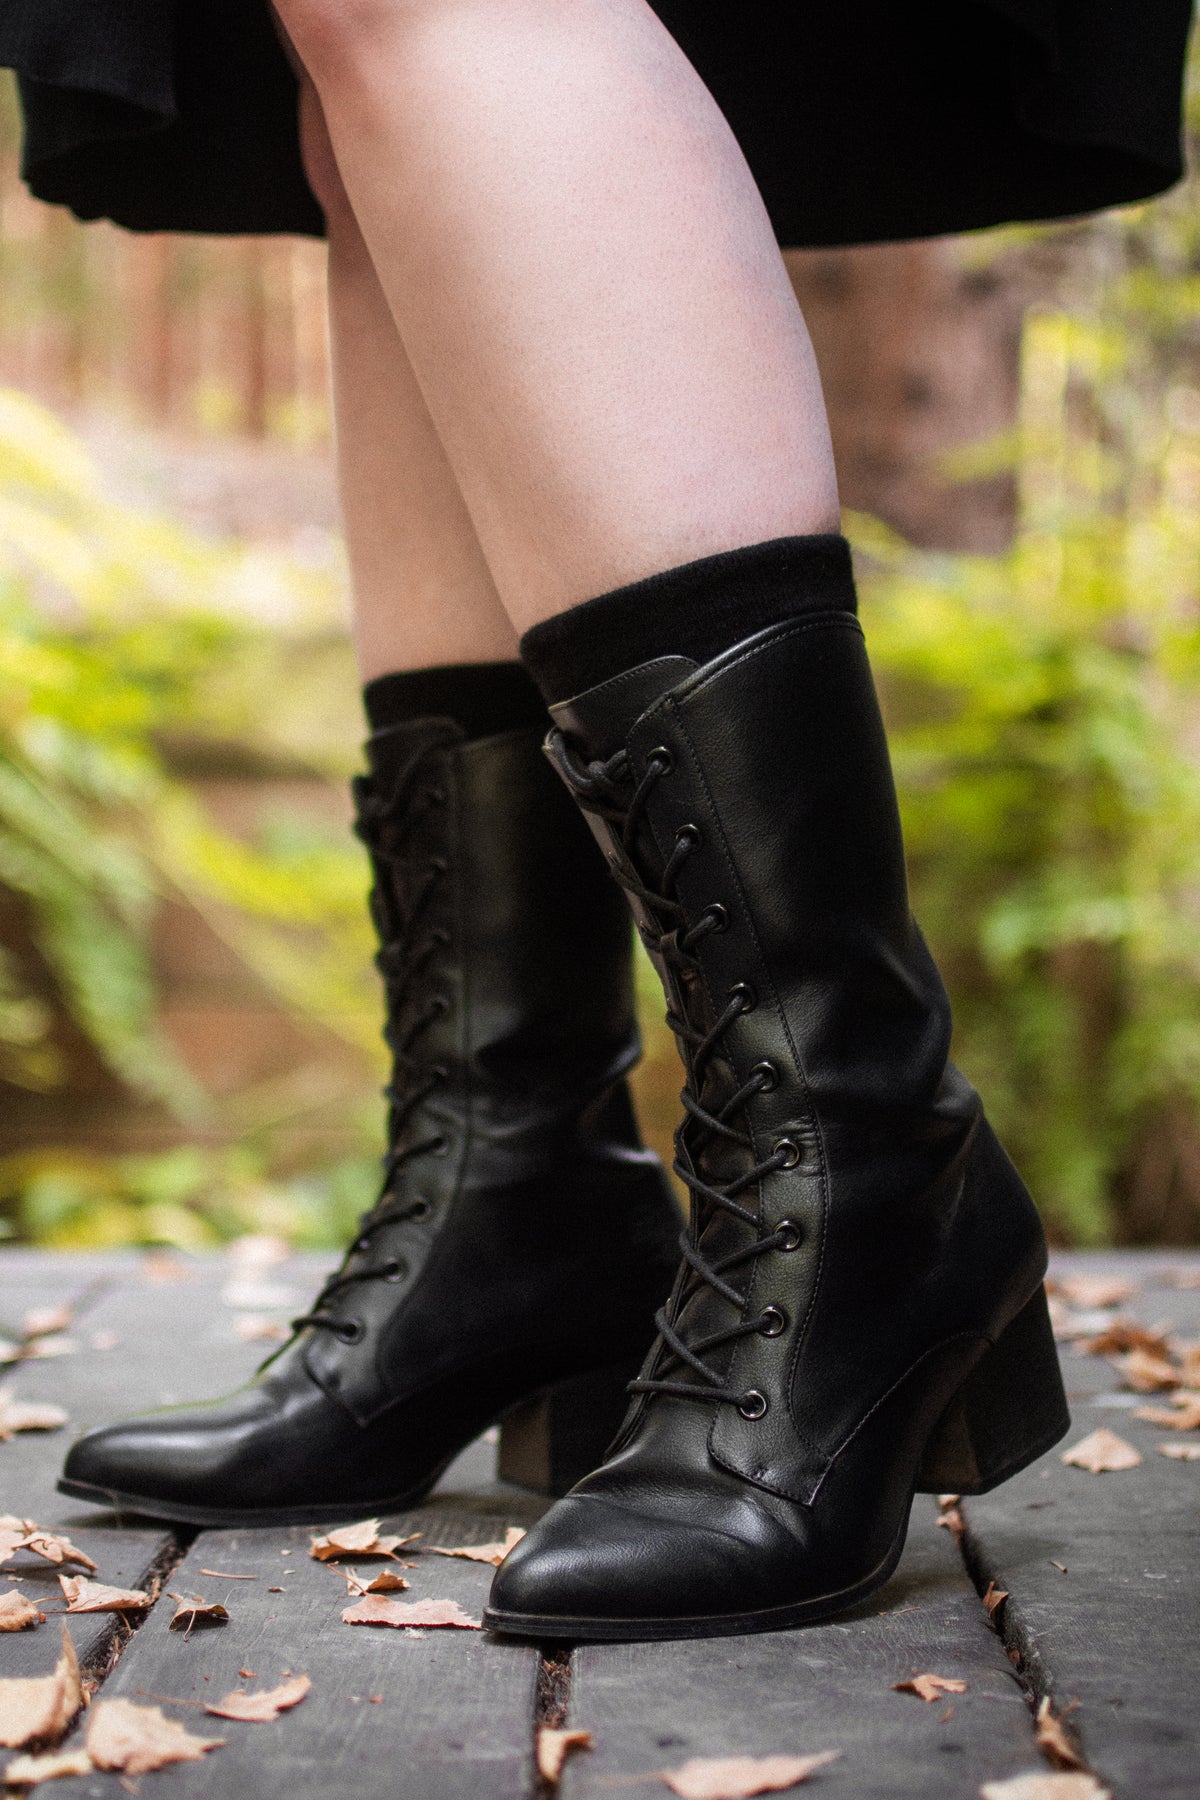 The Nancy Boot - Size 11 left!